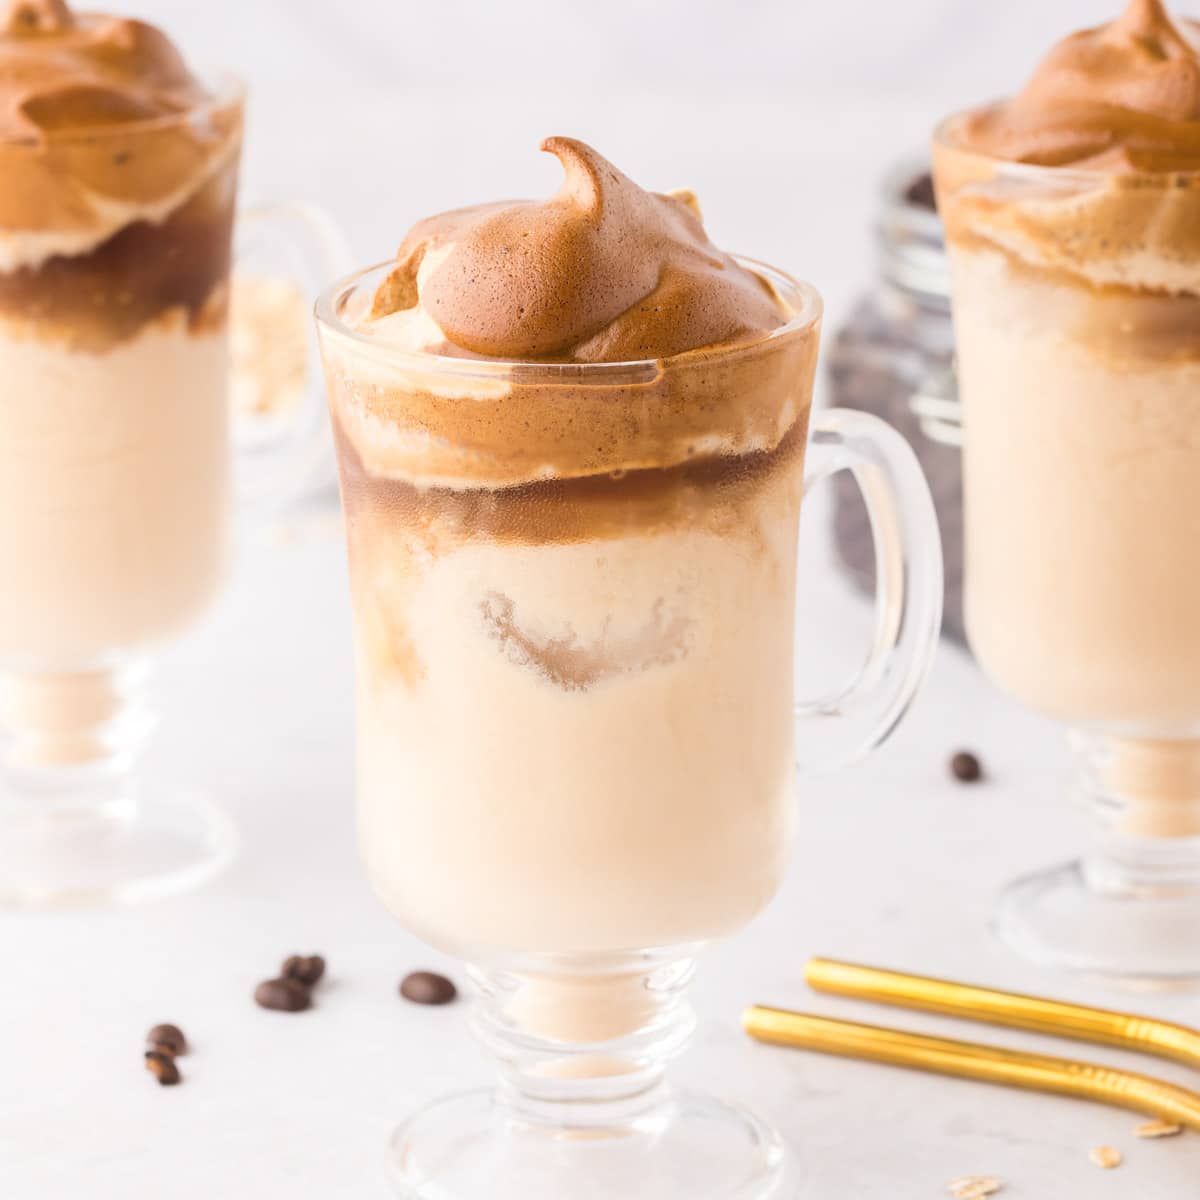 A clear coffee mug filled with iced milk topped with whipped sweetened coffee.